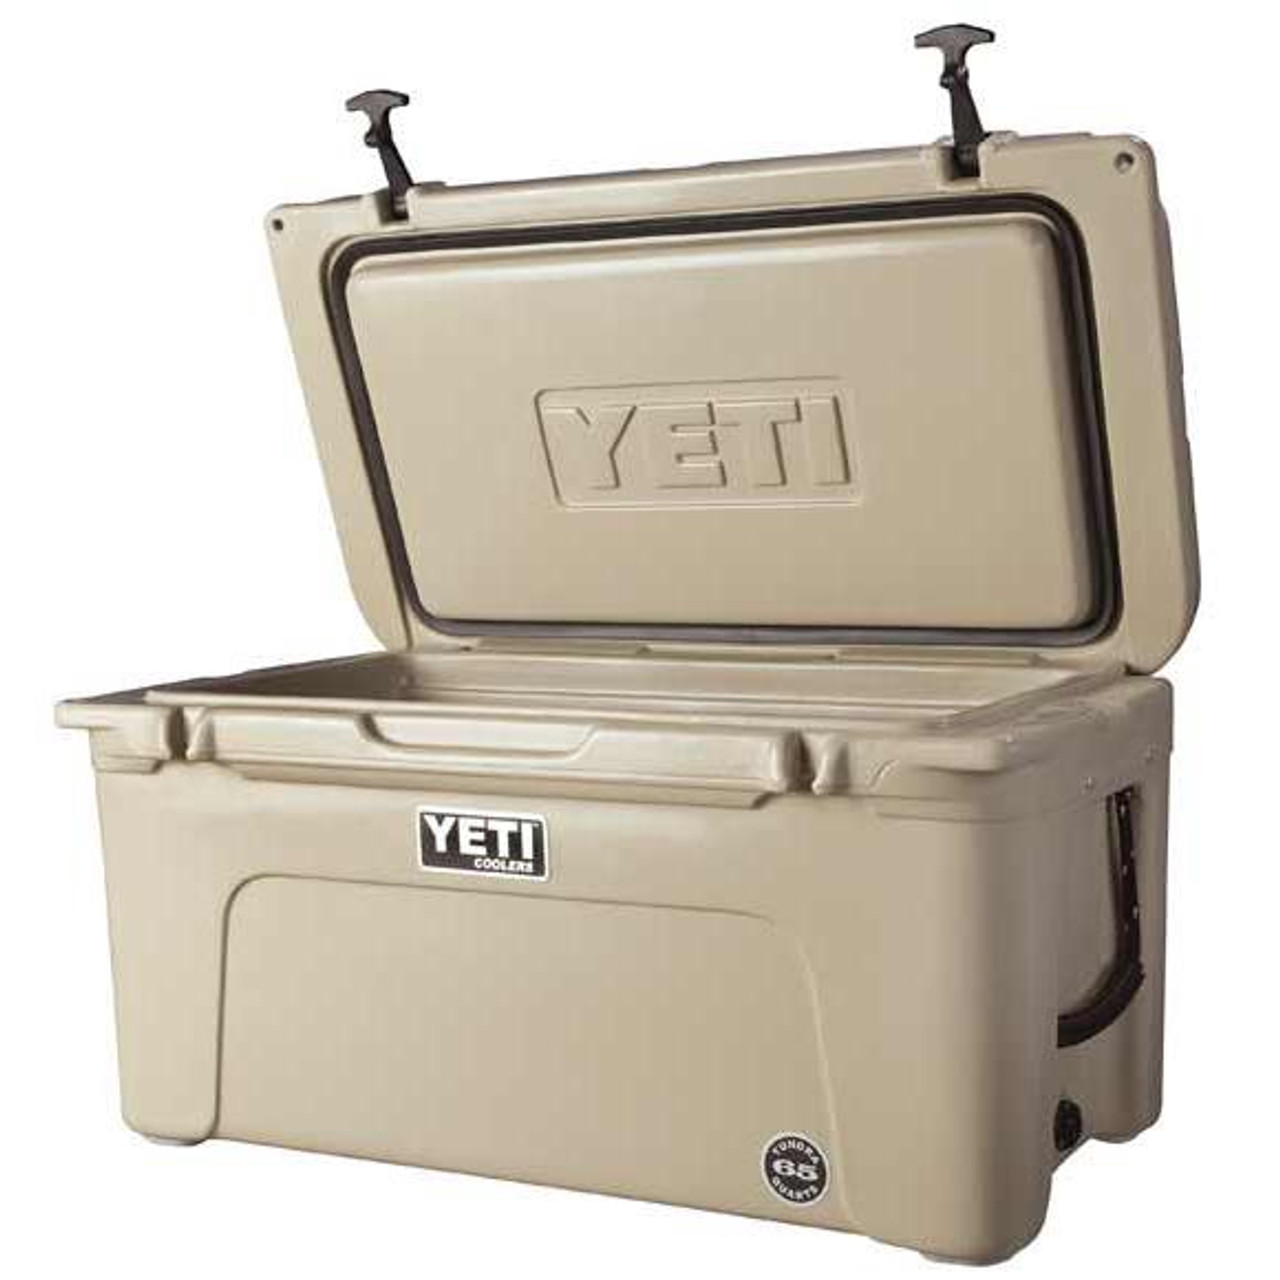 https://cdn11.bigcommerce.com/s-70mih4s/images/stencil/1280x1280/products/9154/18568/Yeti-YT65T-Tundra-65-Quart-Cooler-01439453066_image2__92181.1392823028.jpg?c=2